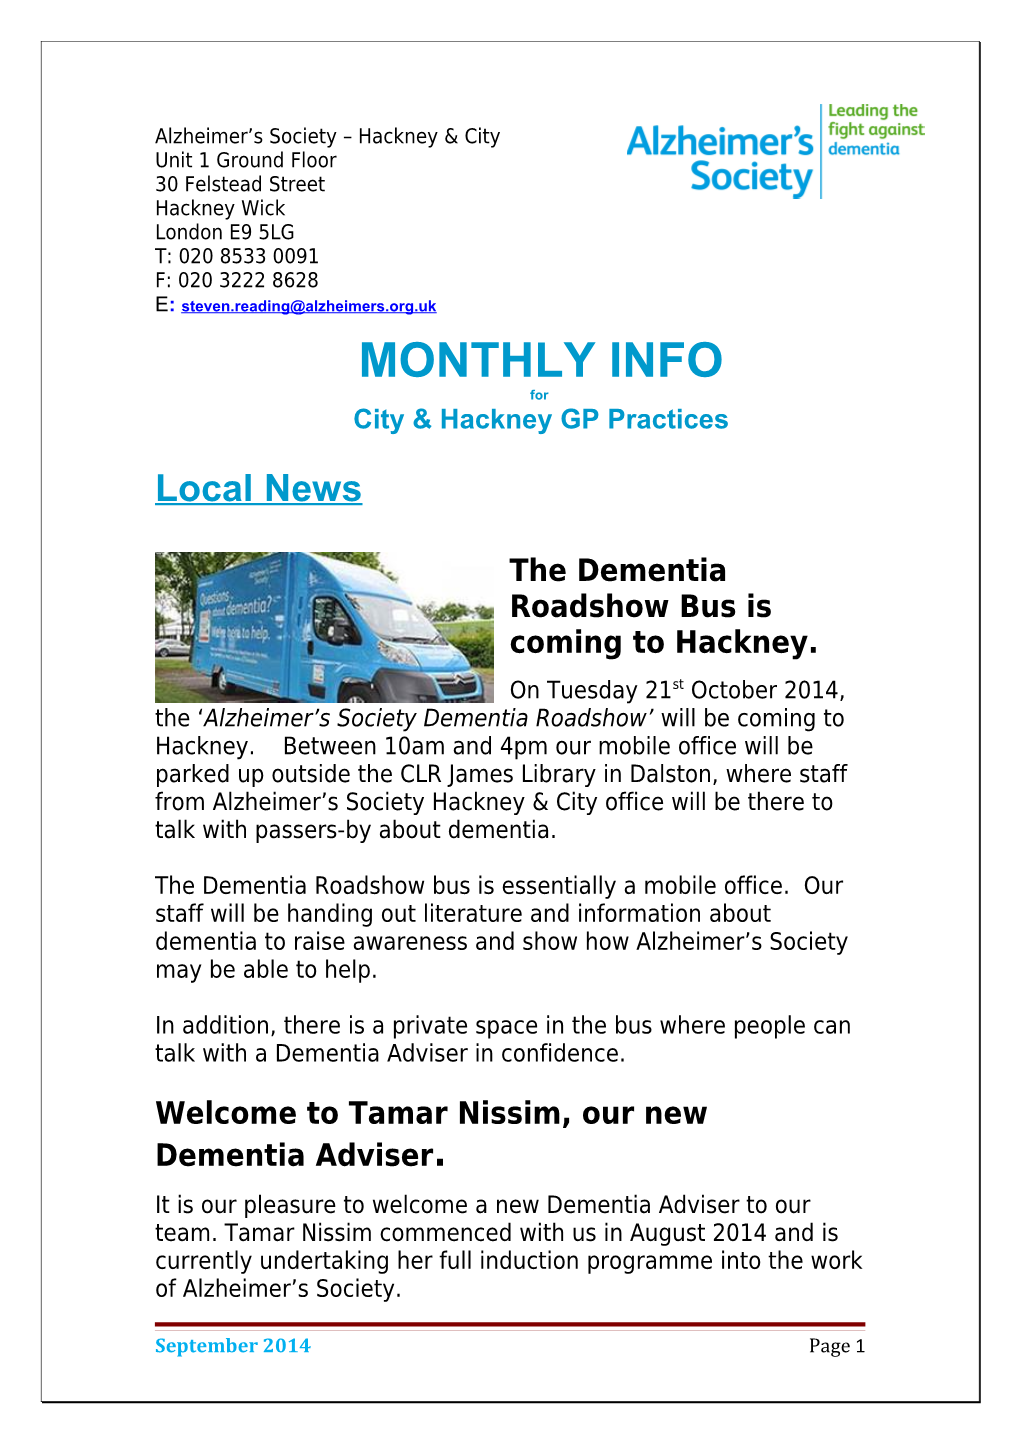 The Dementia Roadshow Bus Is Coming to Hackney